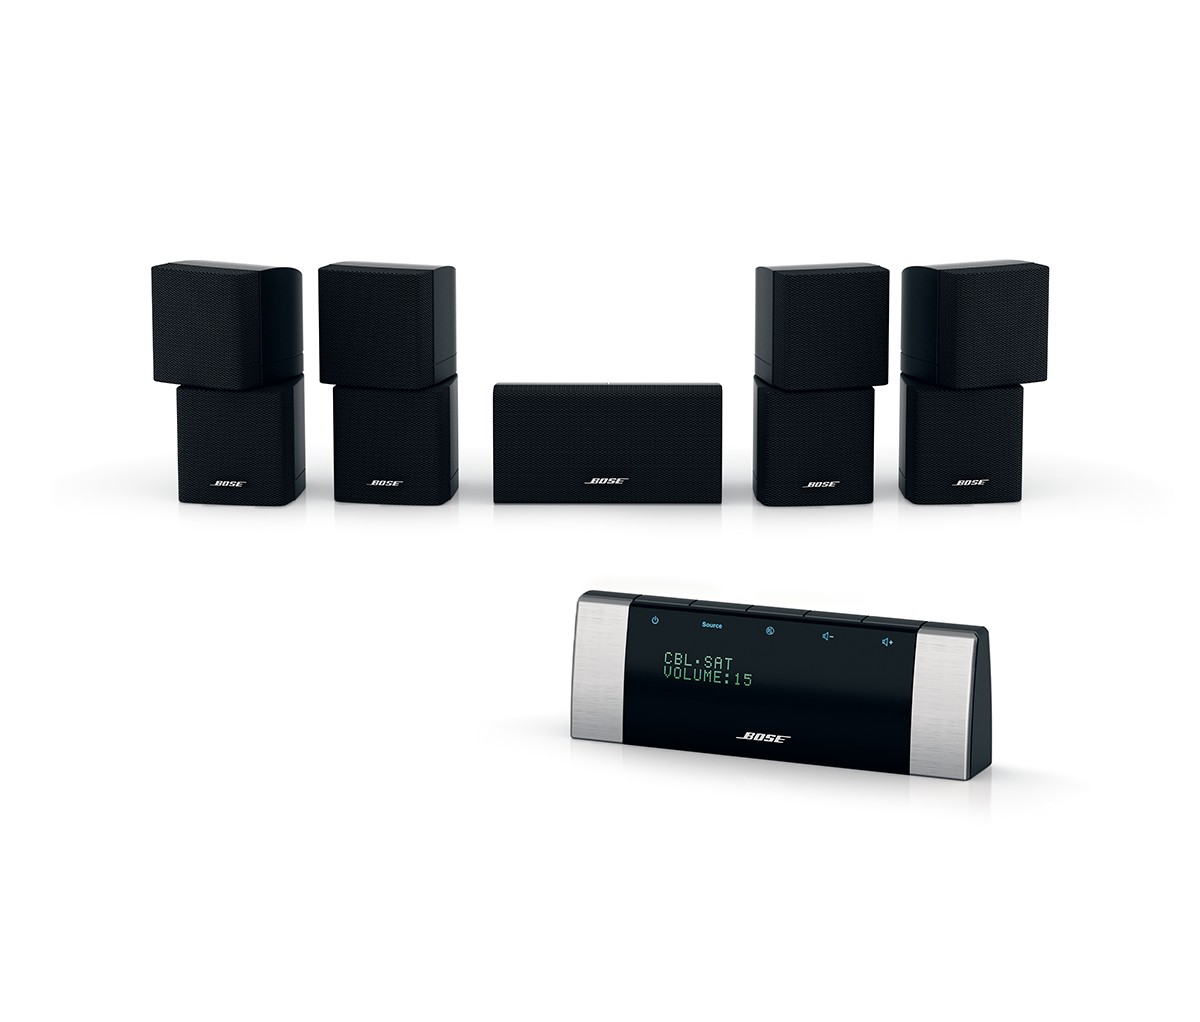 Lifestyle® V20 Home Theater System Bose Product Support